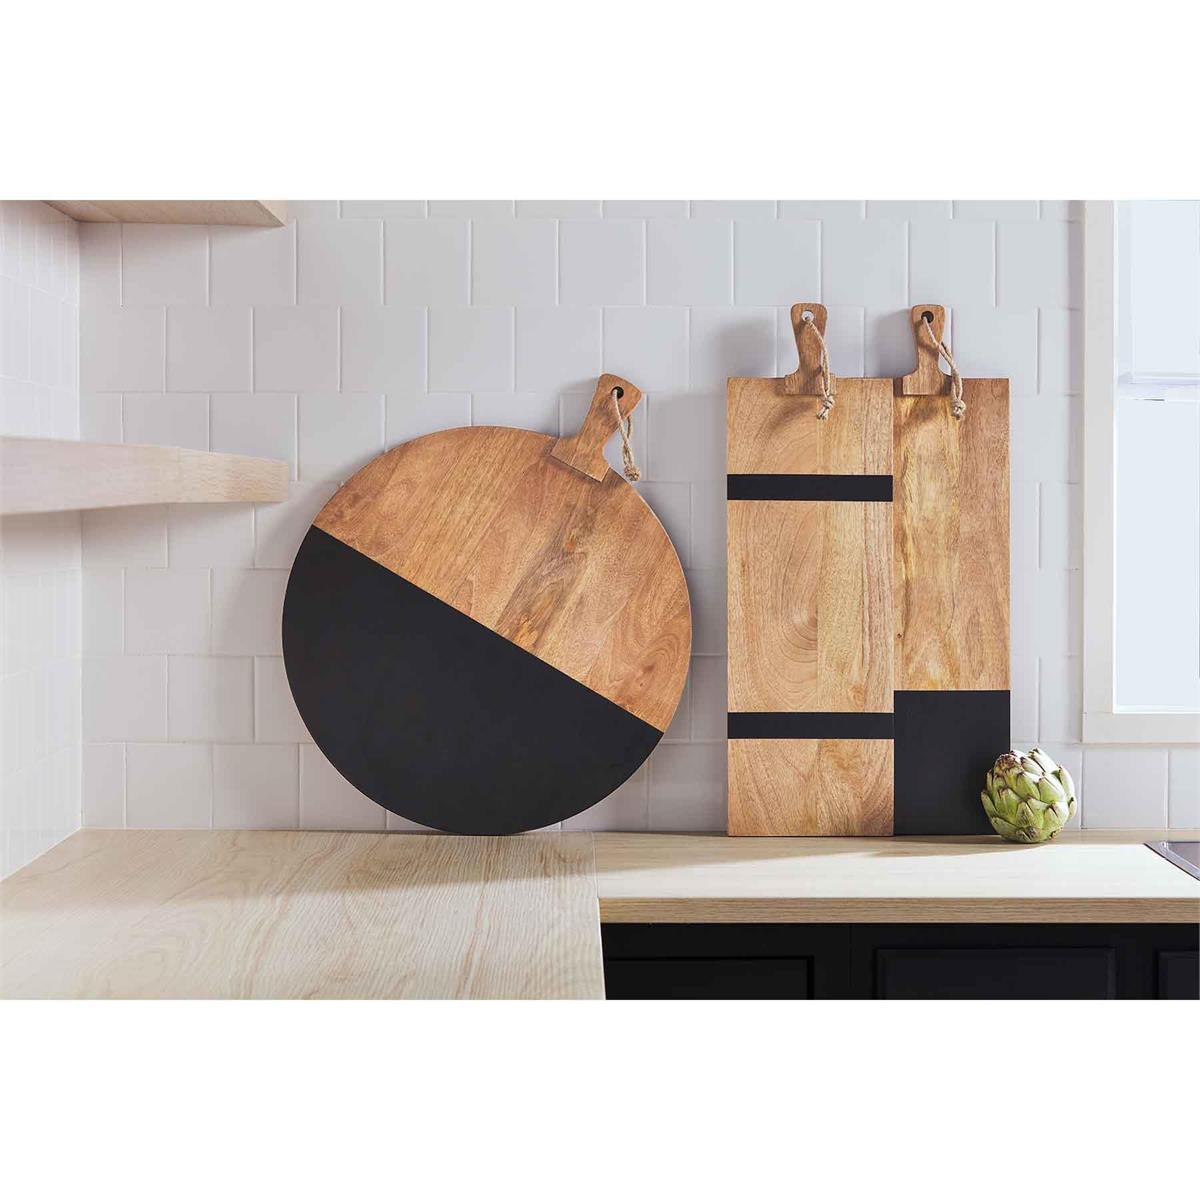 all three styles of black and natural wood boards displayed on a kitchen counter against a white backsplash 